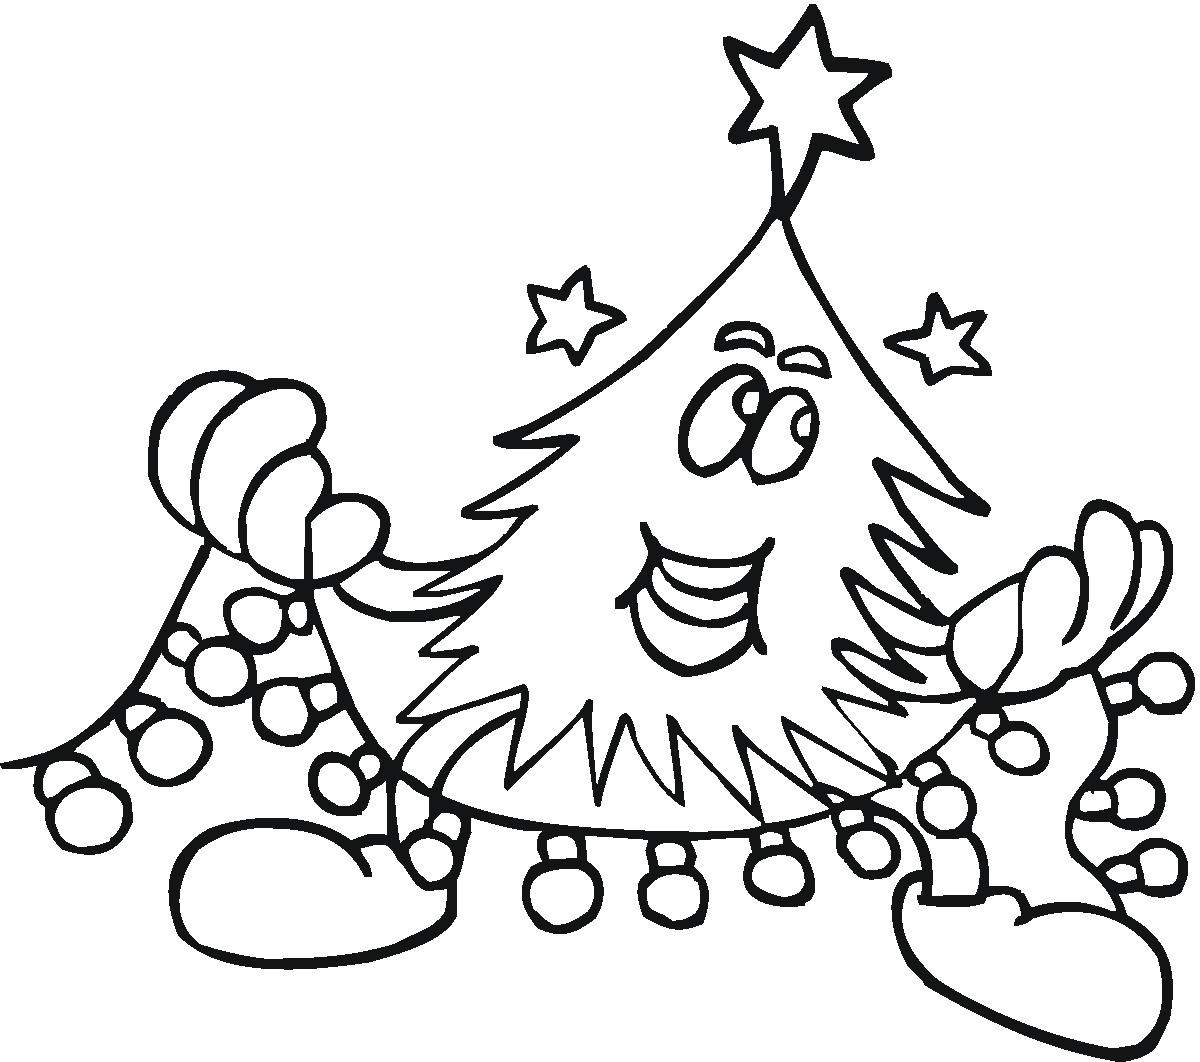 december-coloring-pages-best-coloring-pages-for-kids